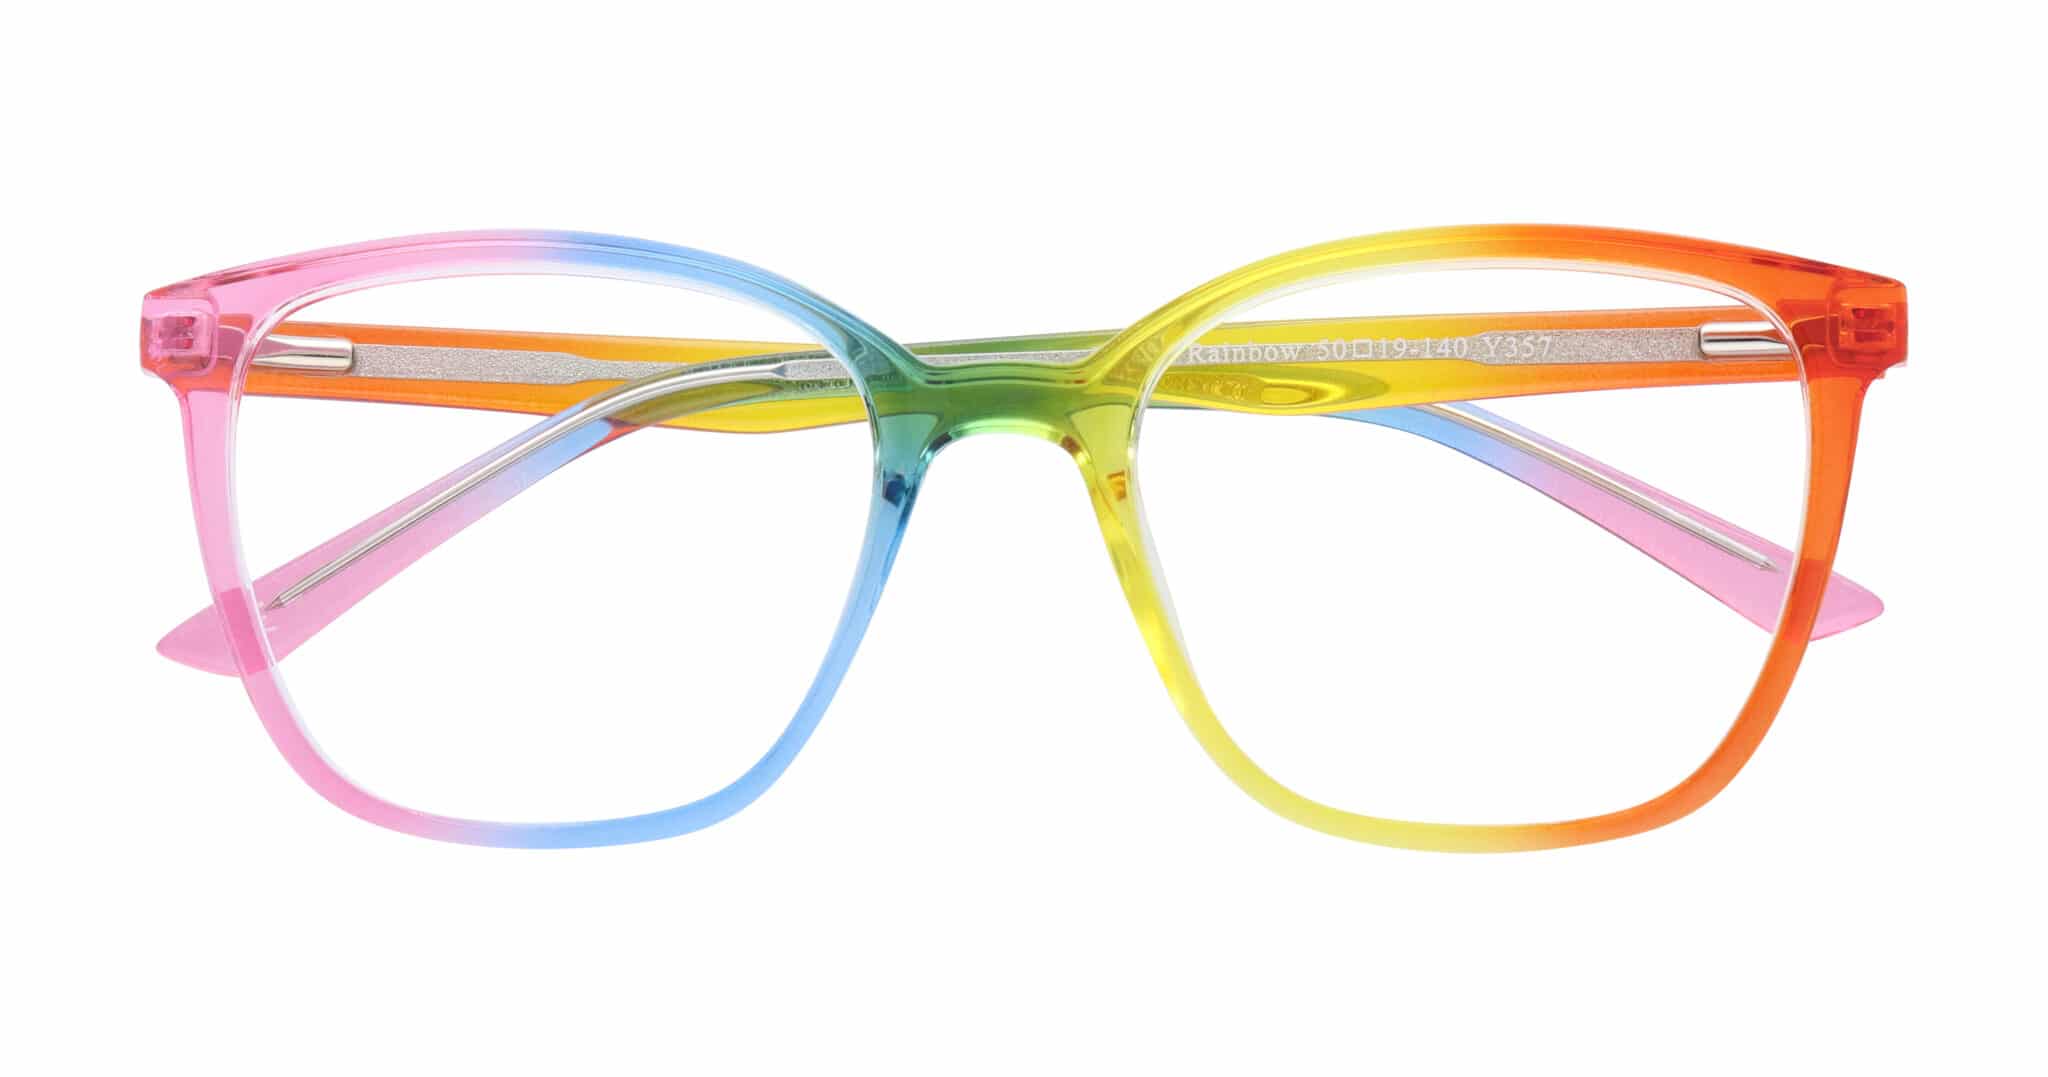 The Diversity frame has an eye-catching square shape. (Glasses Direct)